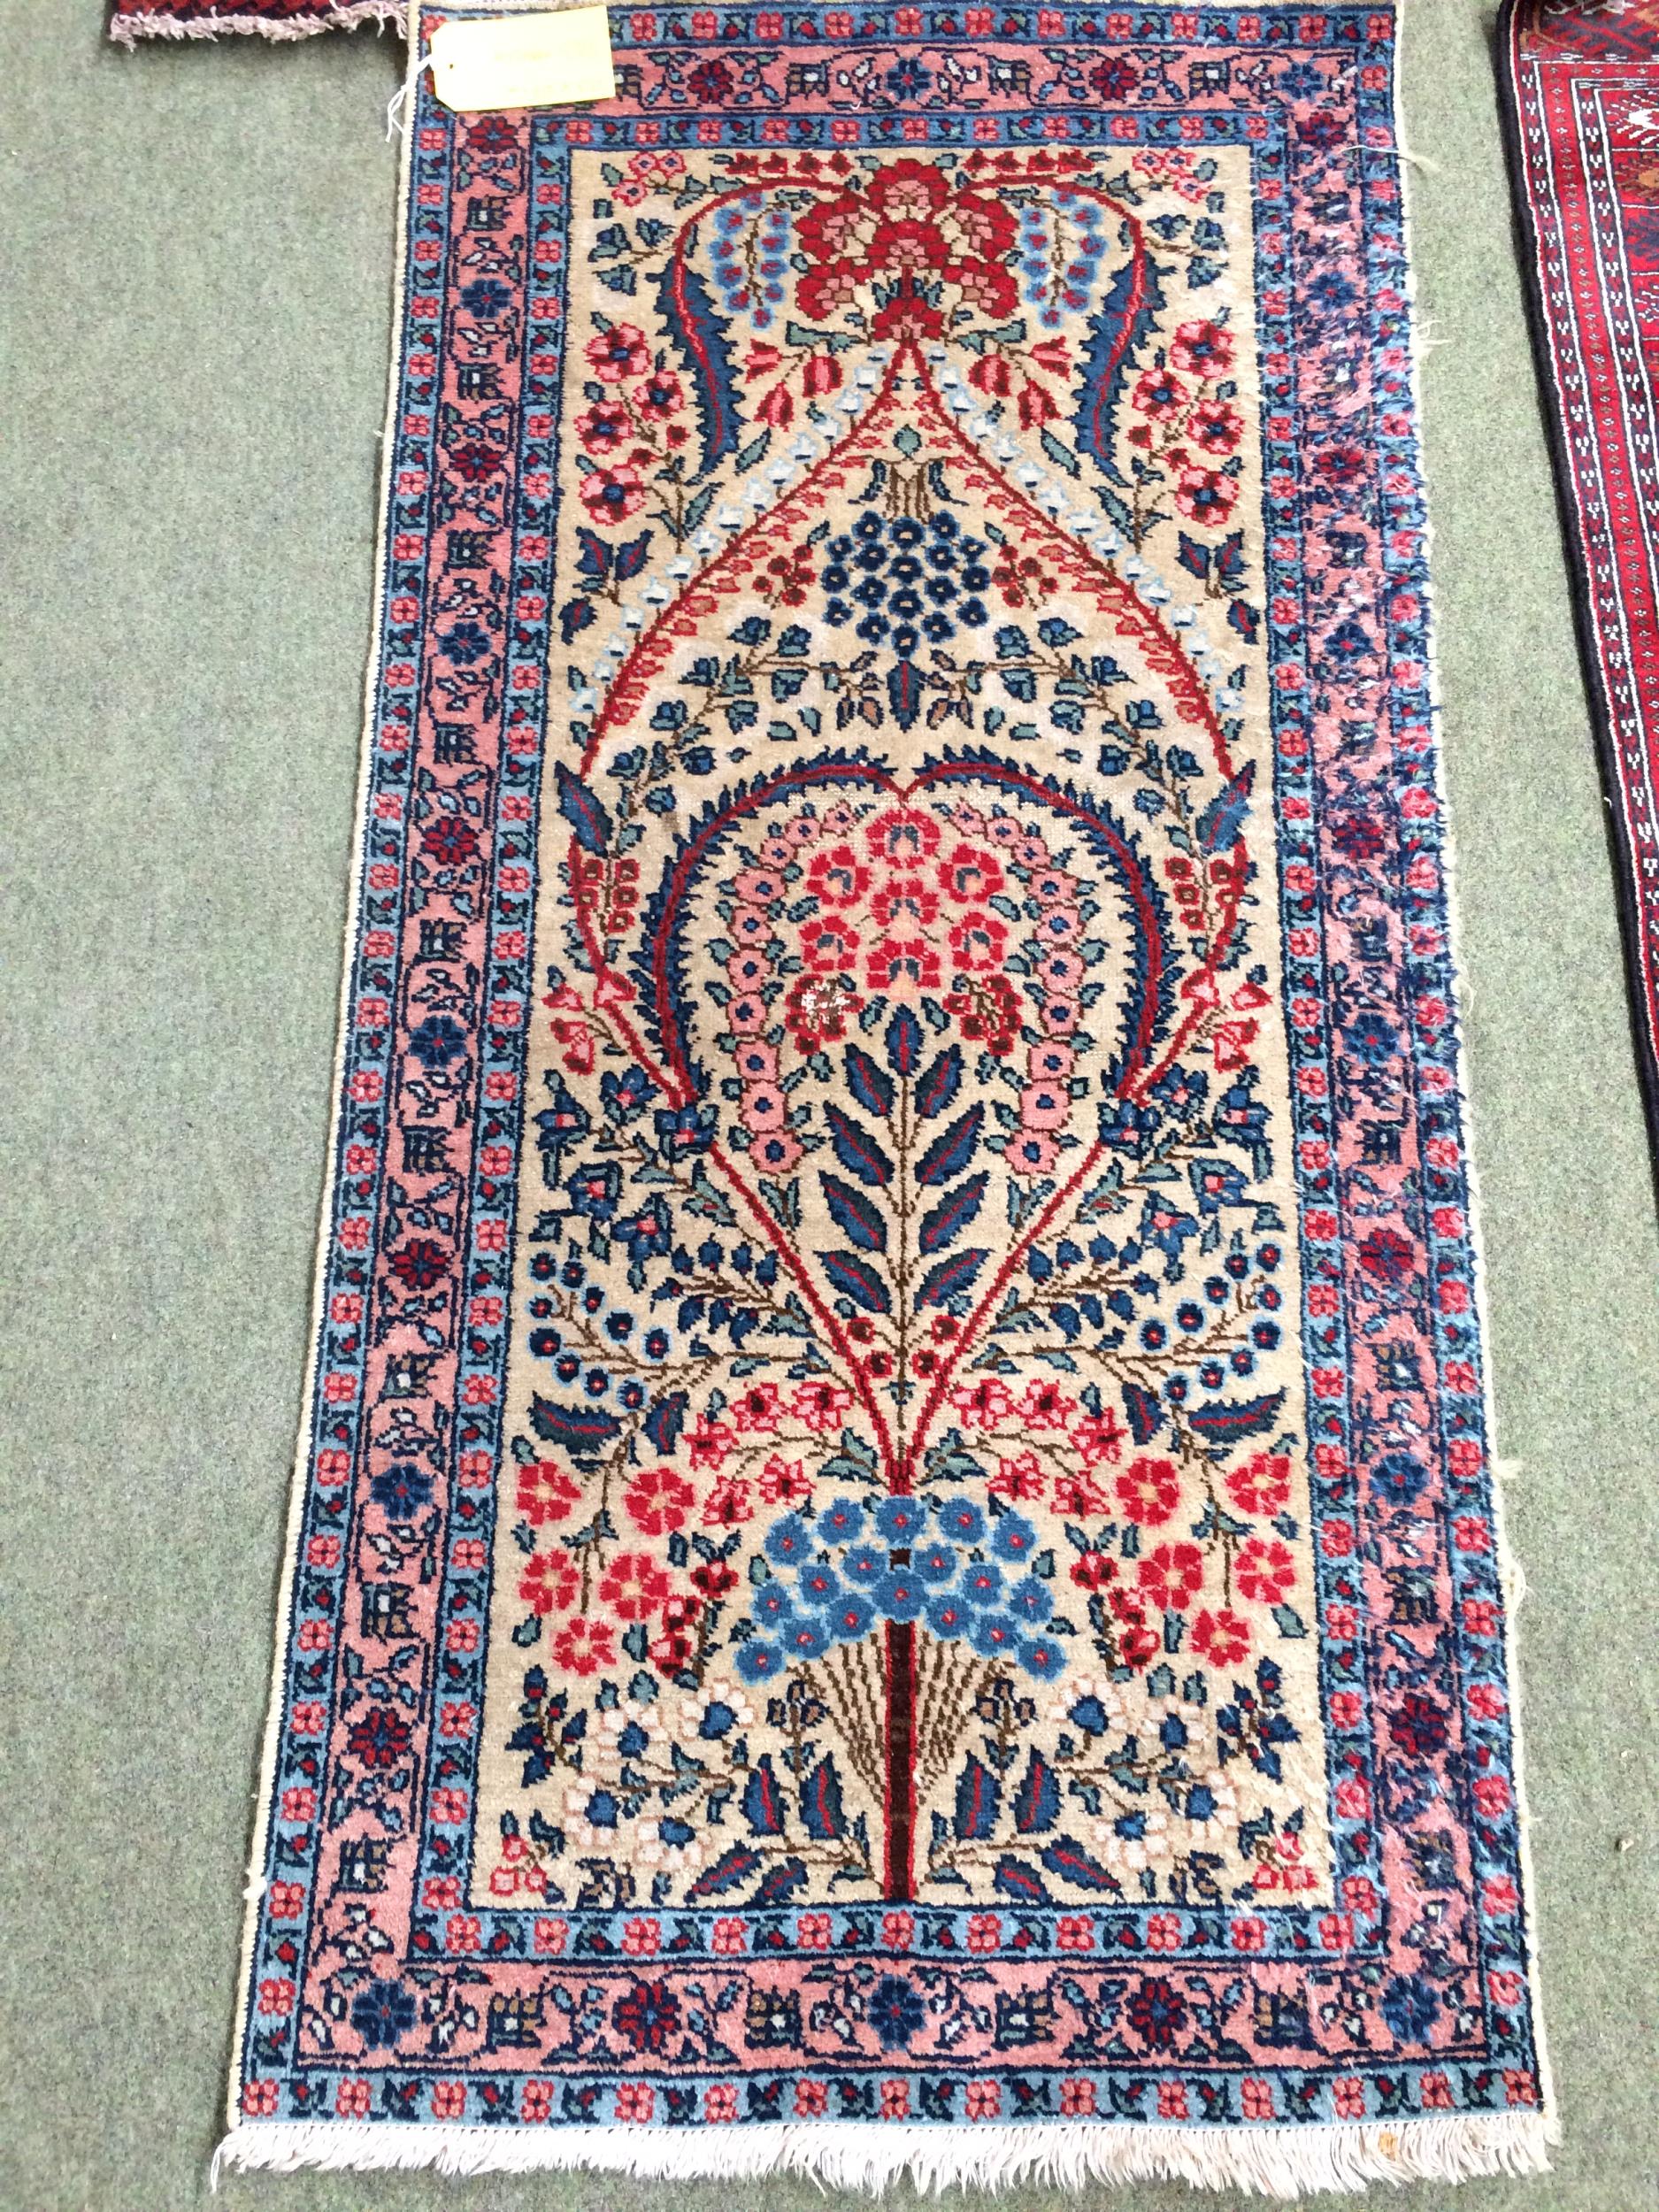 4 rugs, 3 red ground rugs with all over geometric stylized designs, and a blue and red ground Tree